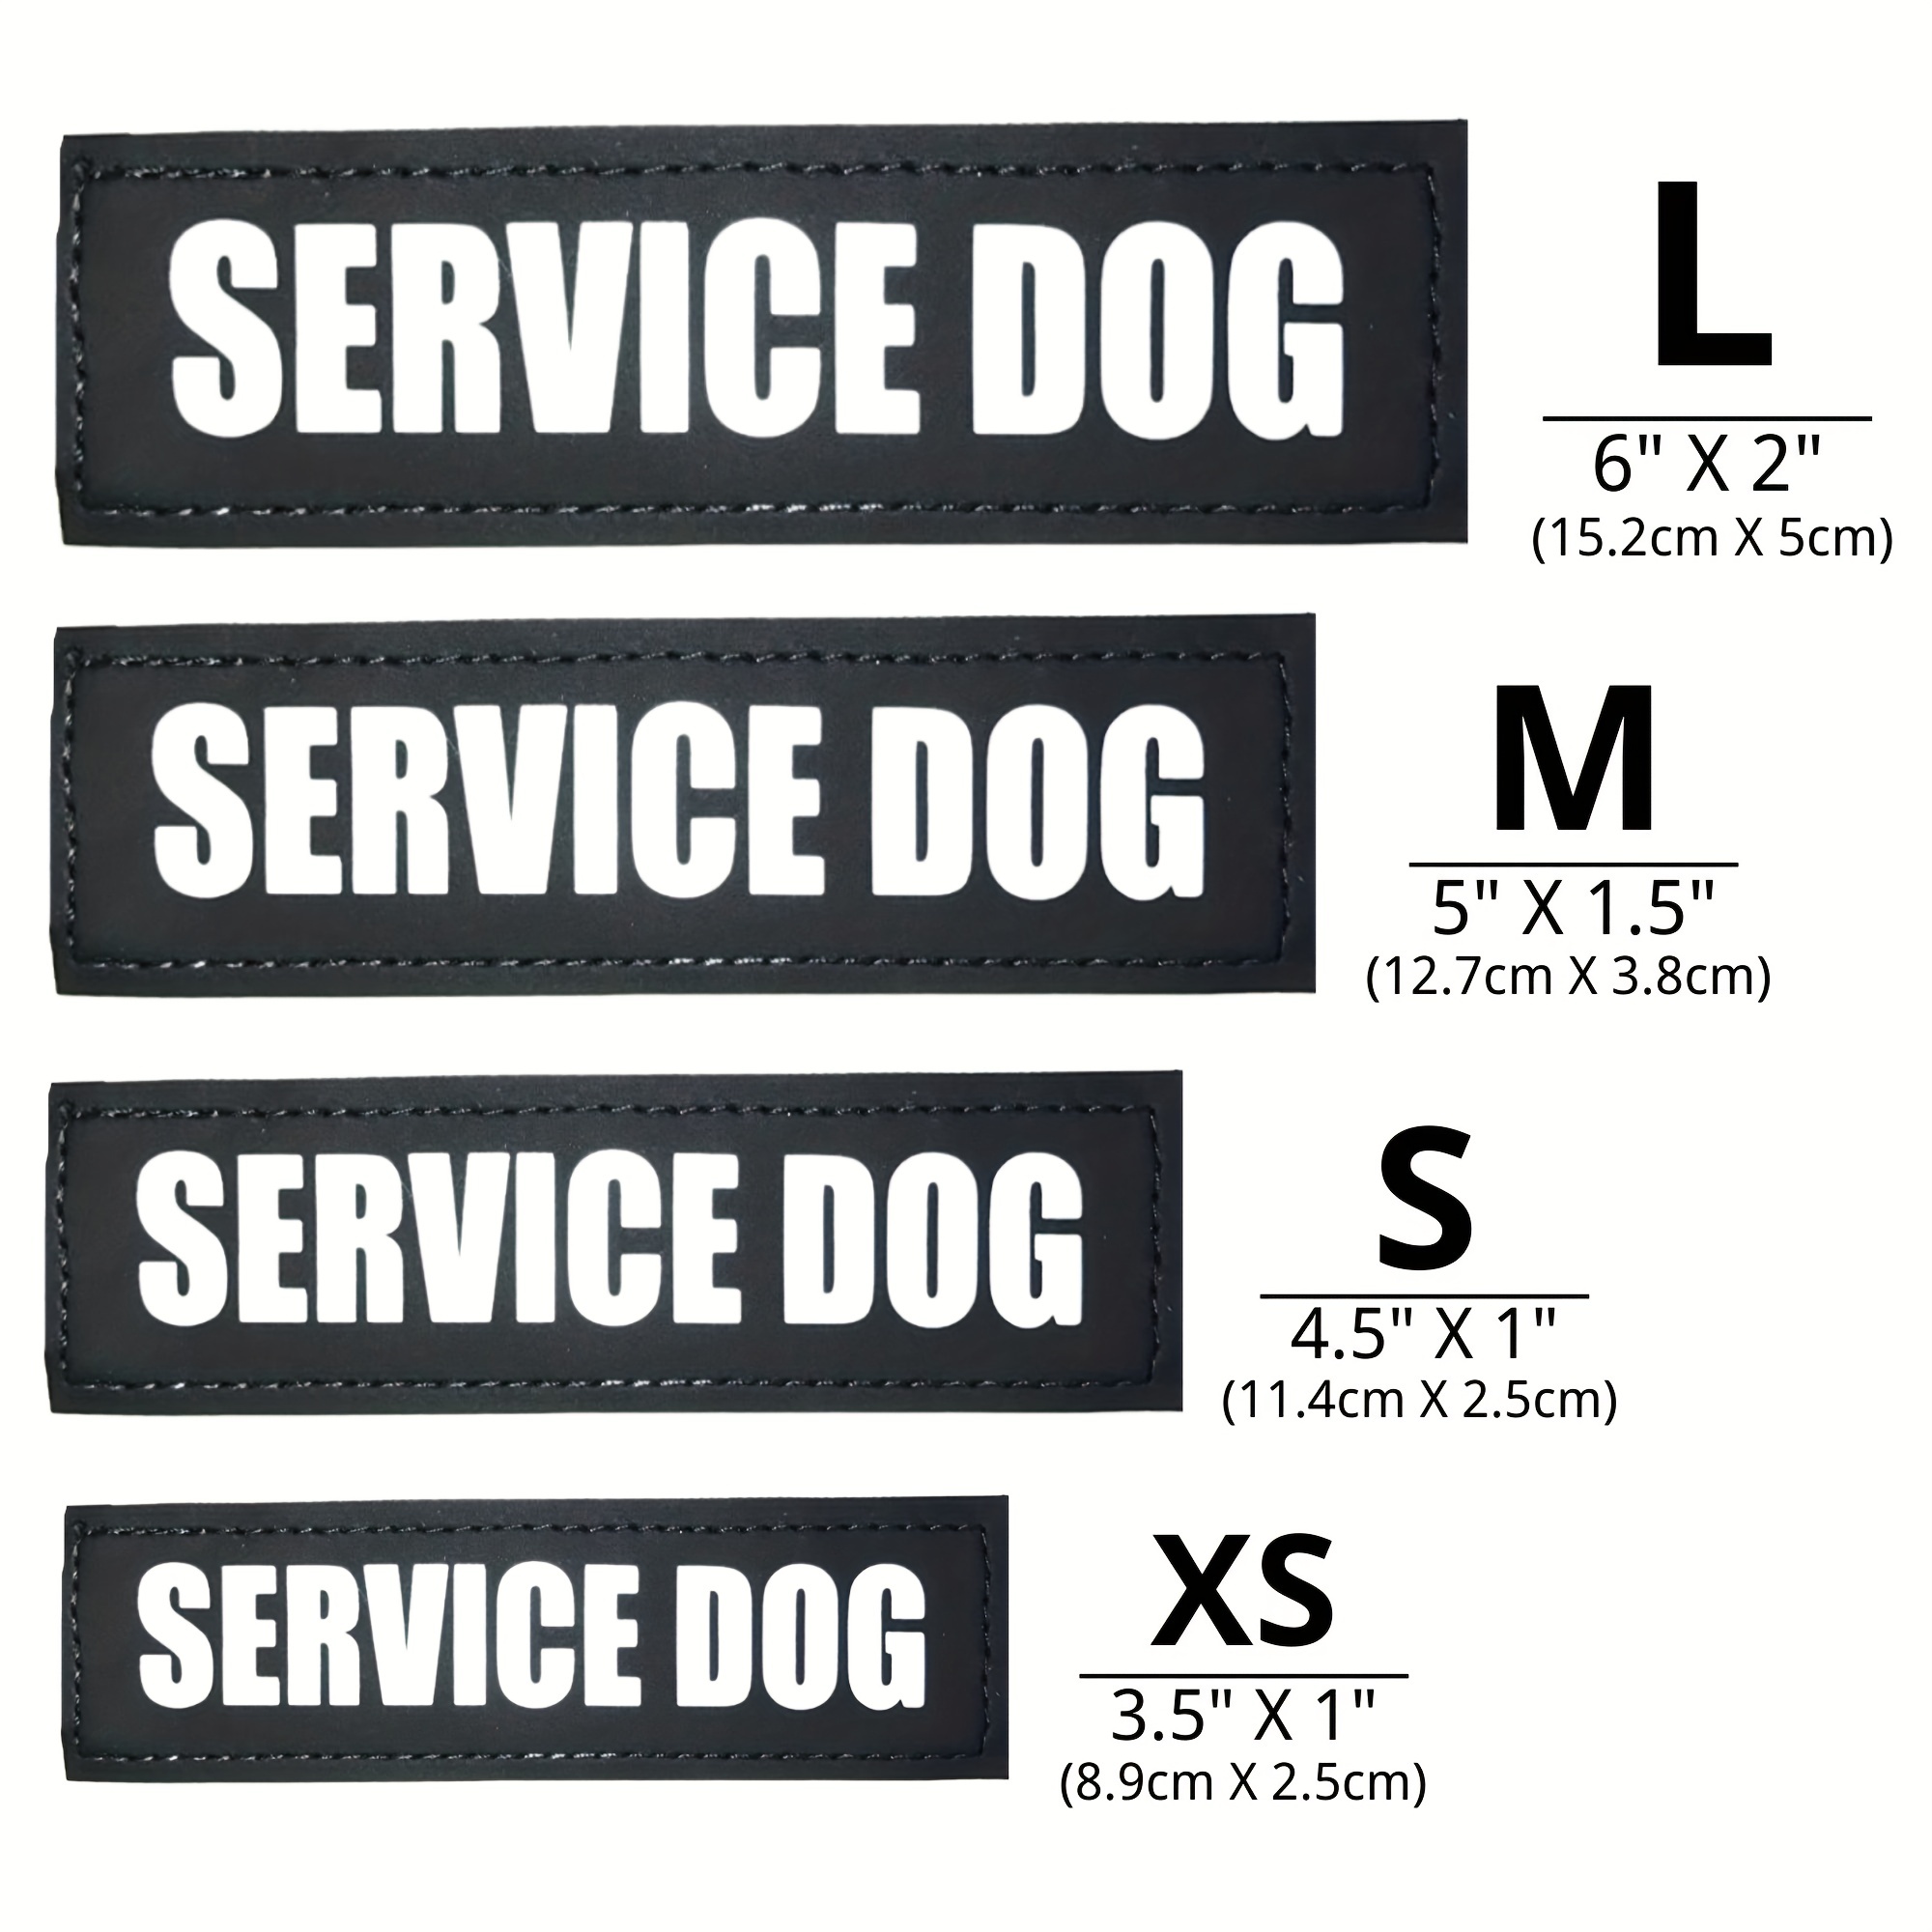 Leashboss Service Dog Patches for Vest - Embroidered 2 Pack - Hook and Loop Both Sides (Service Dog, 1.5 x 4 inch)